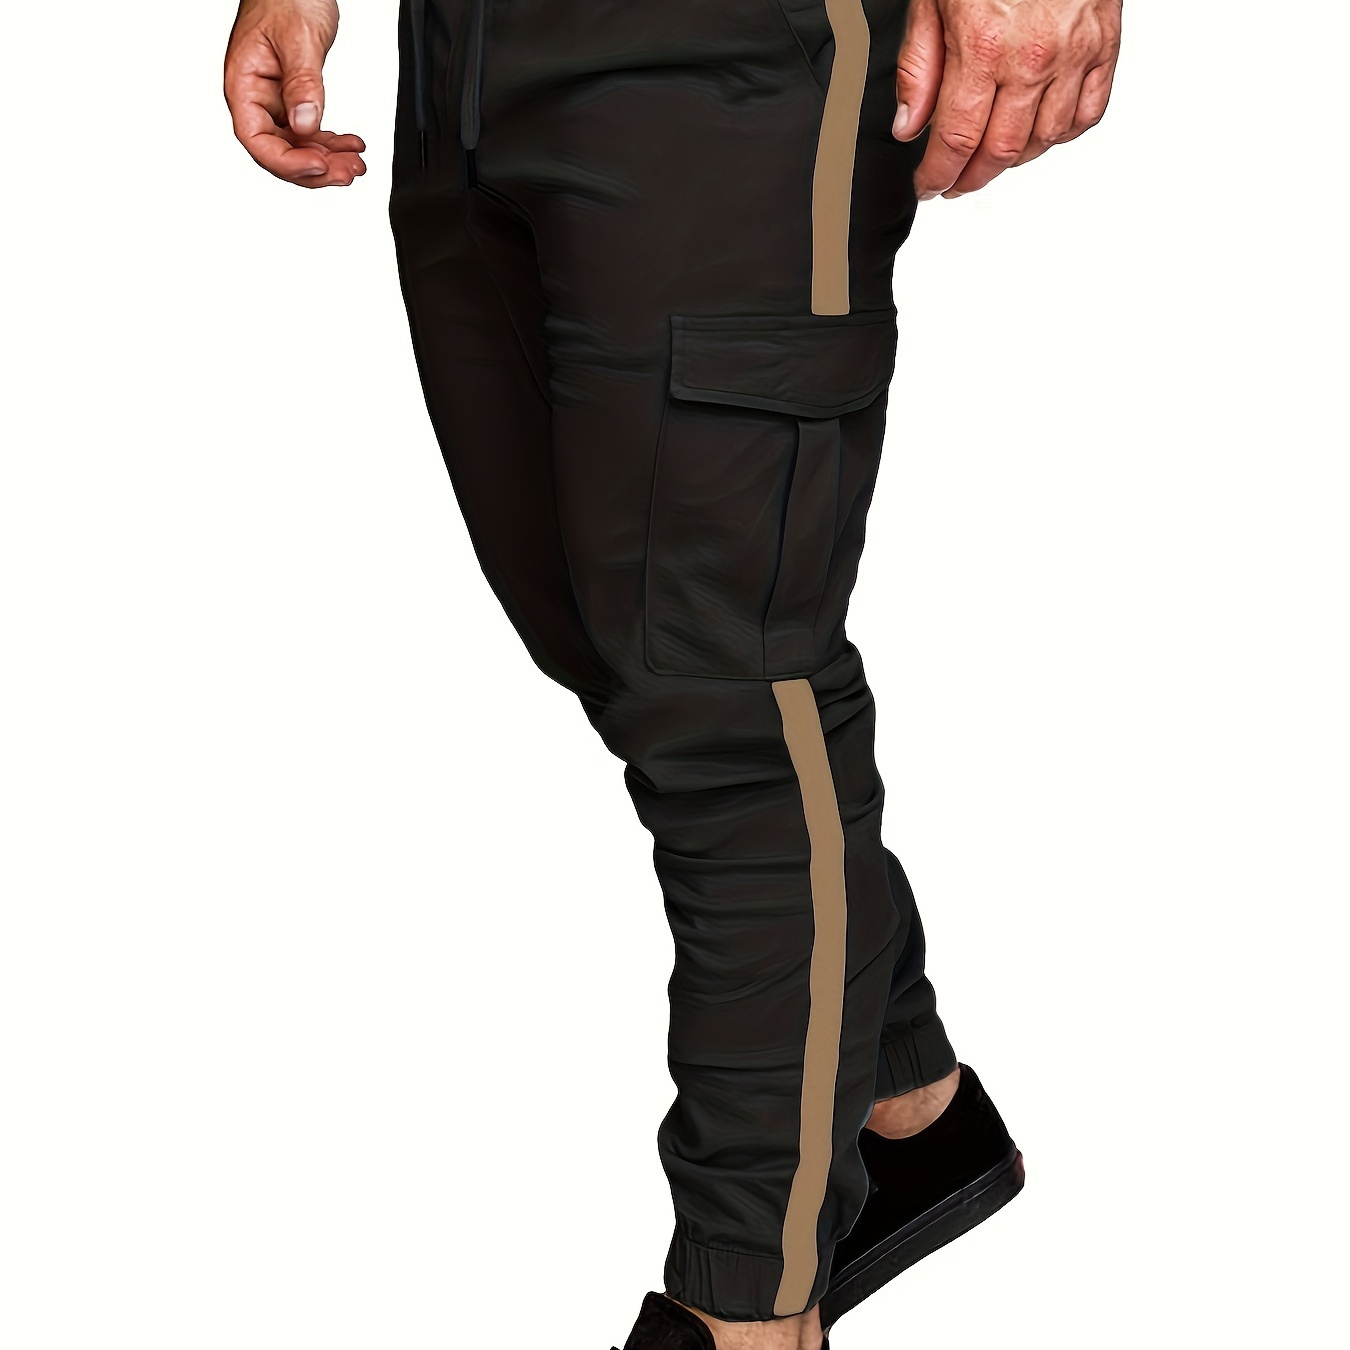 

Men's Stylish Solid Cargo Joggers With Pockets, Causal Breathable Drawstring Men's Bottom Clothing For City Walk Street Hanging Outdoor Activities